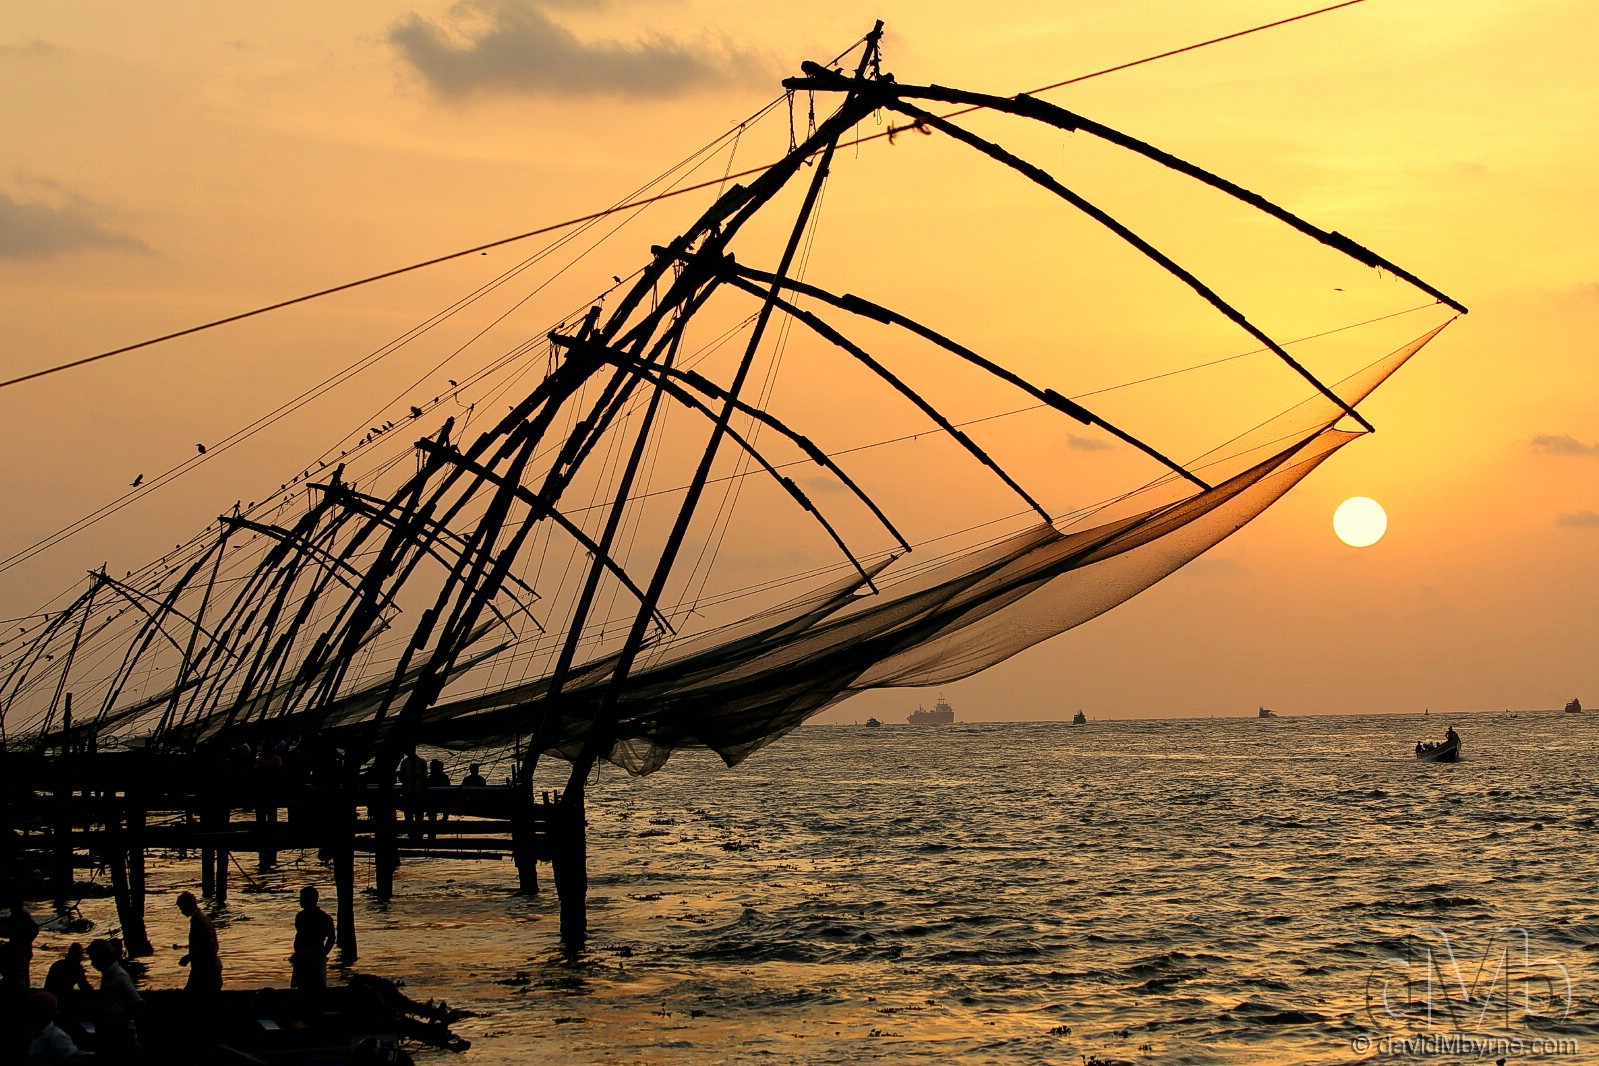 Chinese fishing nets at the tip of Fort Cochin at sunset, Kerala, India. September 19th, 2012 (EOS 60D || Canon 70-300mm || 70mm, 1/250sec, f/5.6, iso100)